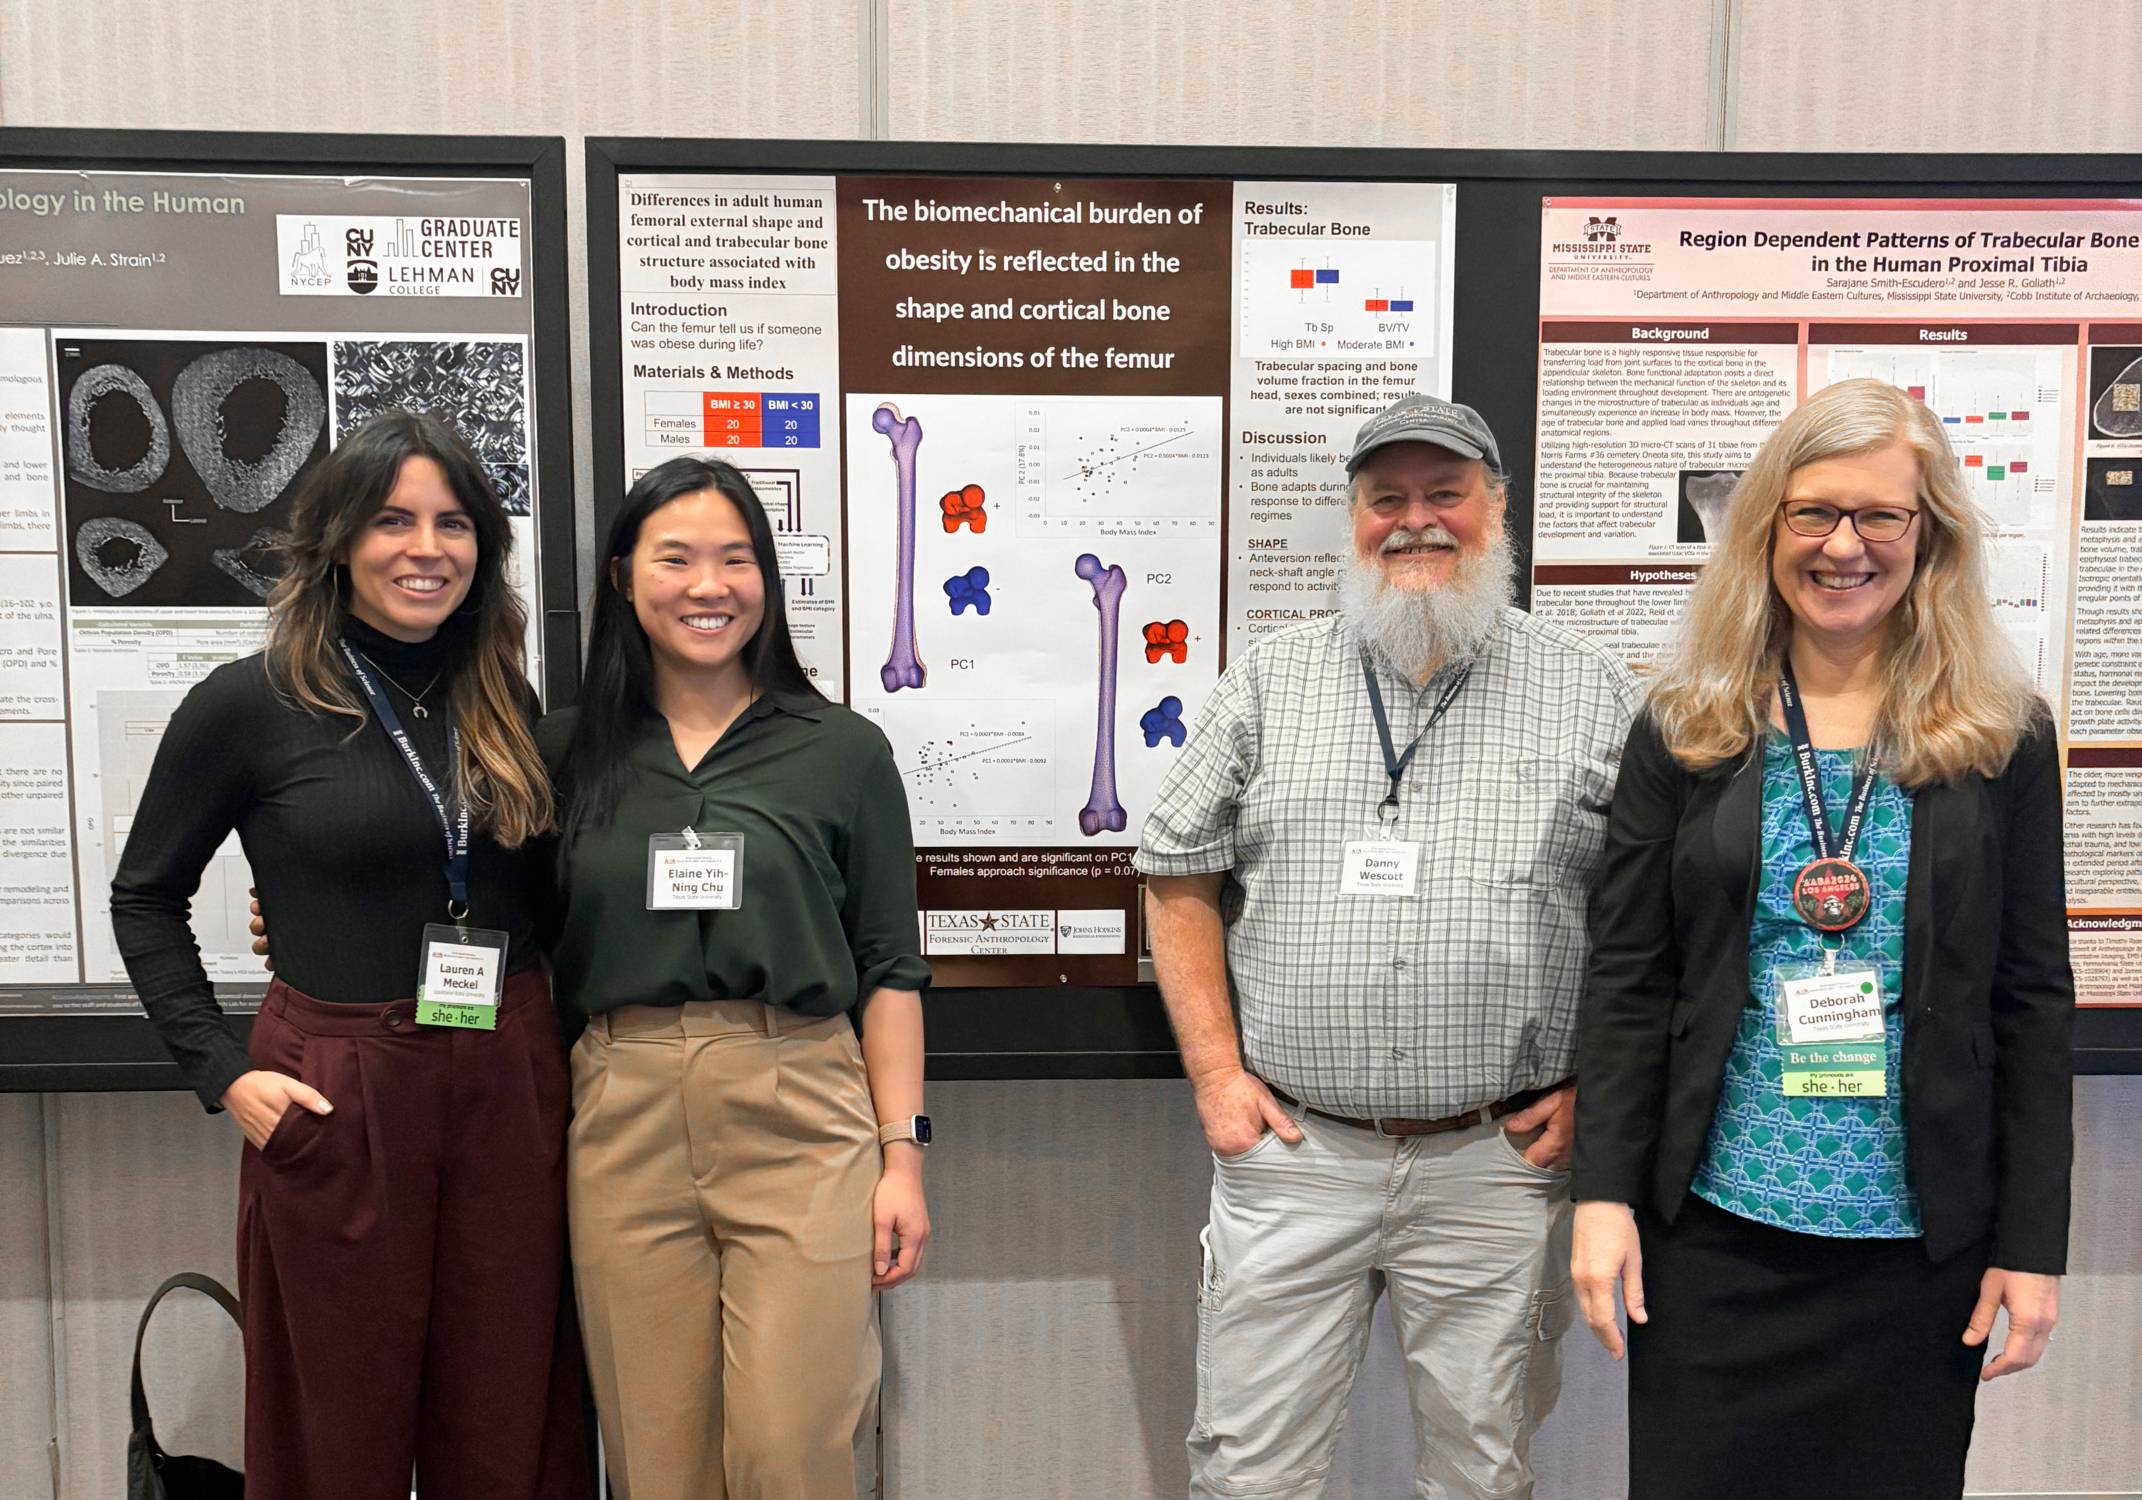 a group of researchers pose in front of a presentation poster